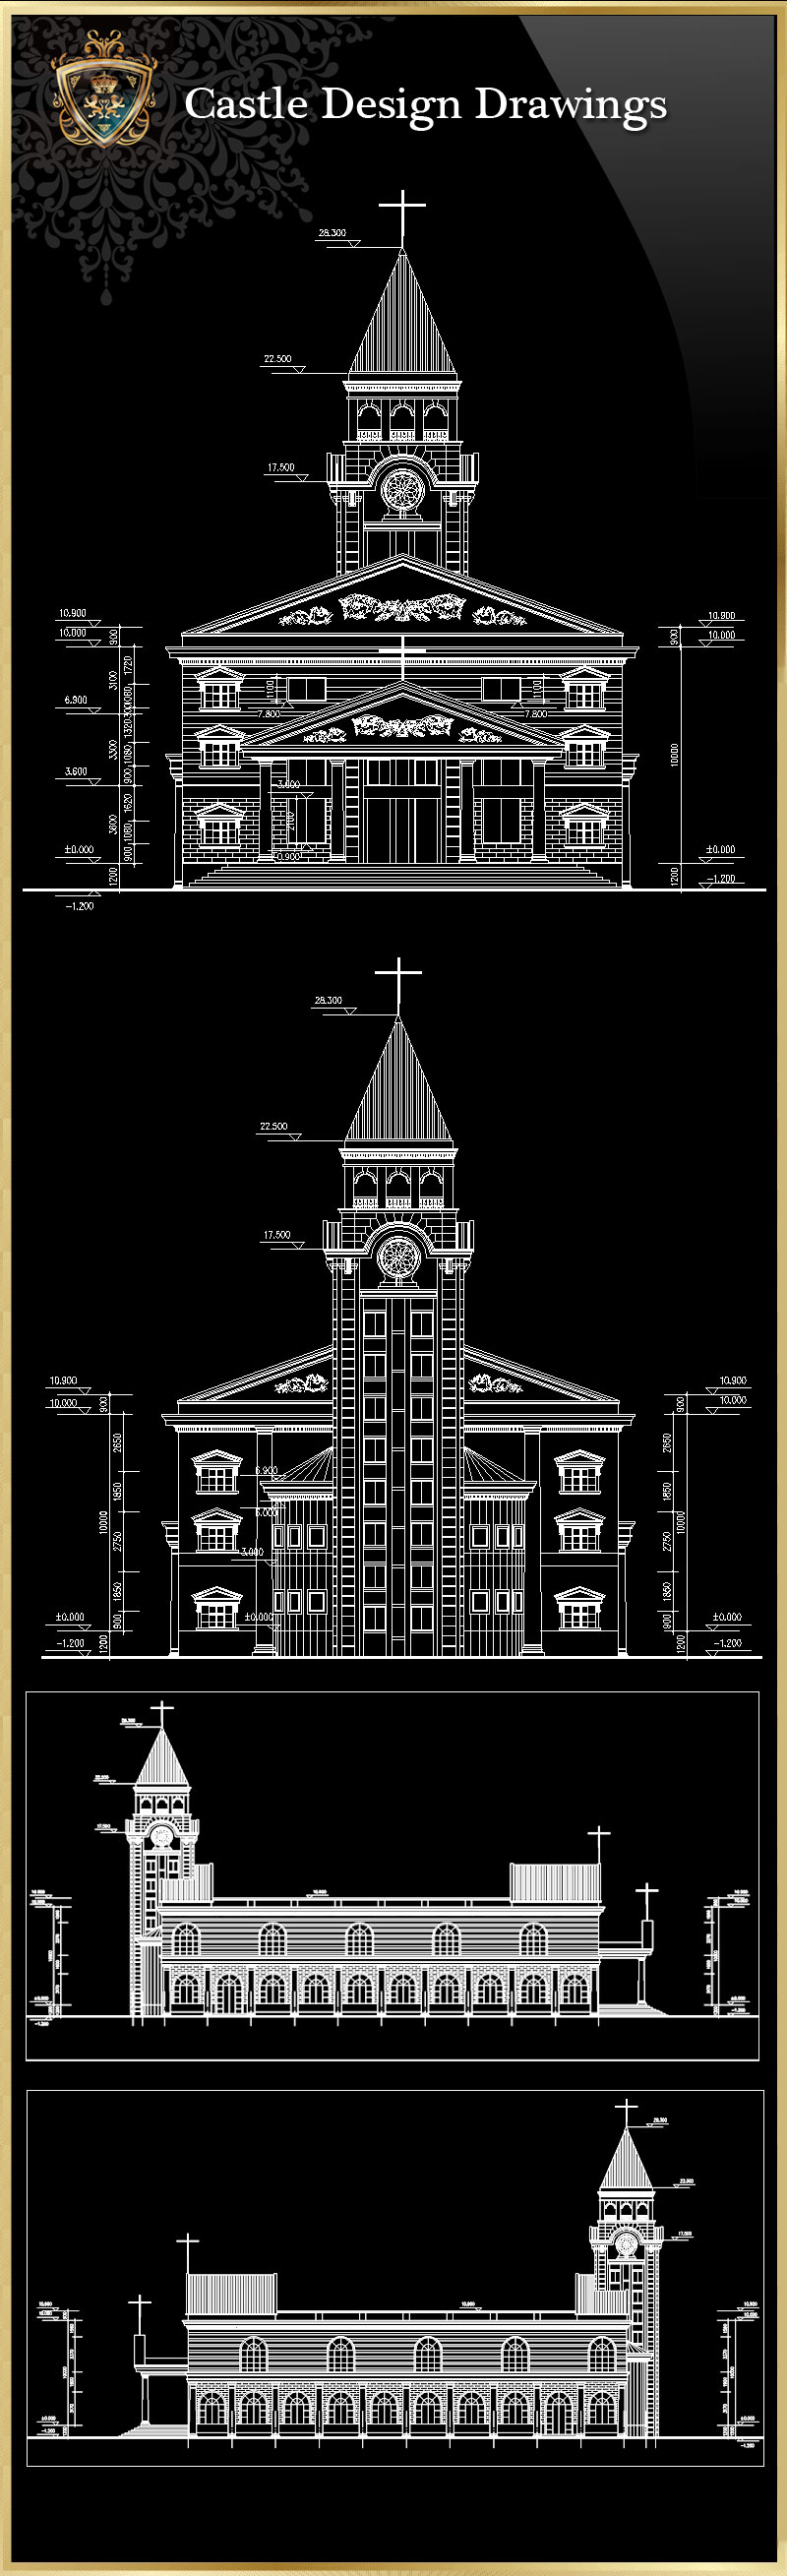 ★【Church Design 2】Download Luxury Architectural Design CAD Drawings--Over 20000+ High quality CAD Blocks and Drawings Download!